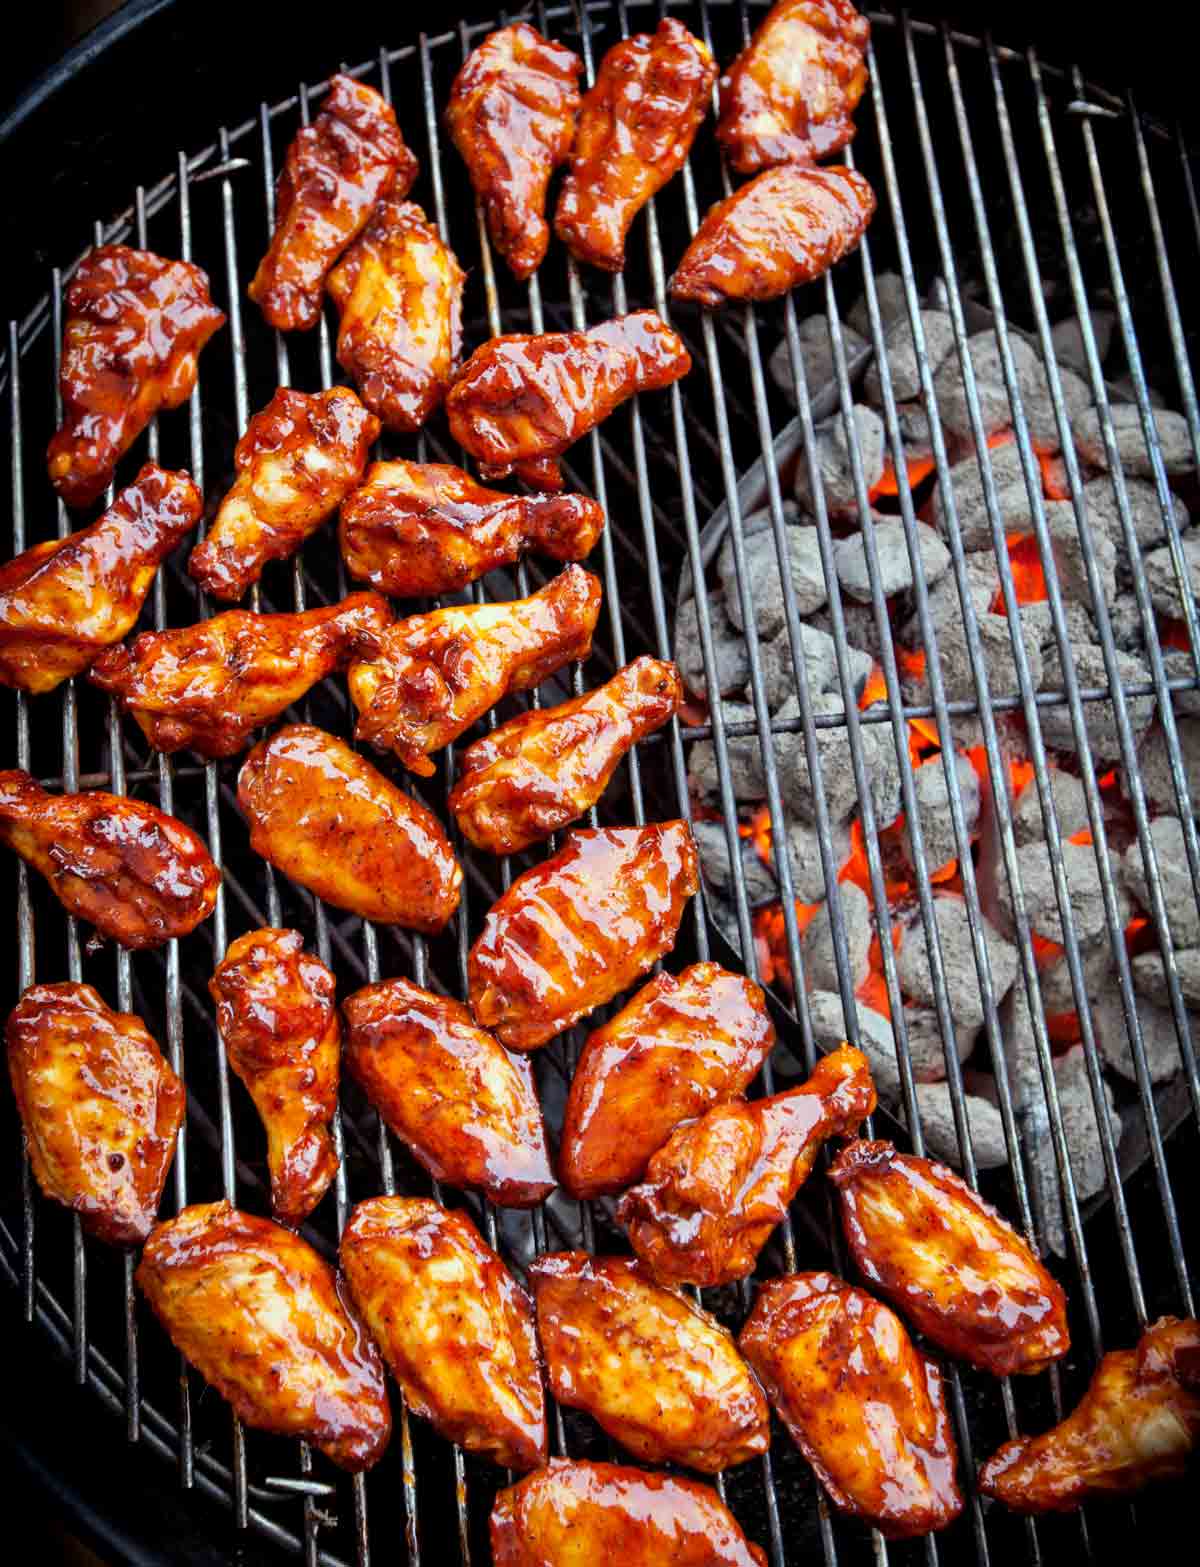 Chicken wings smothered in sauce on a bbq grill